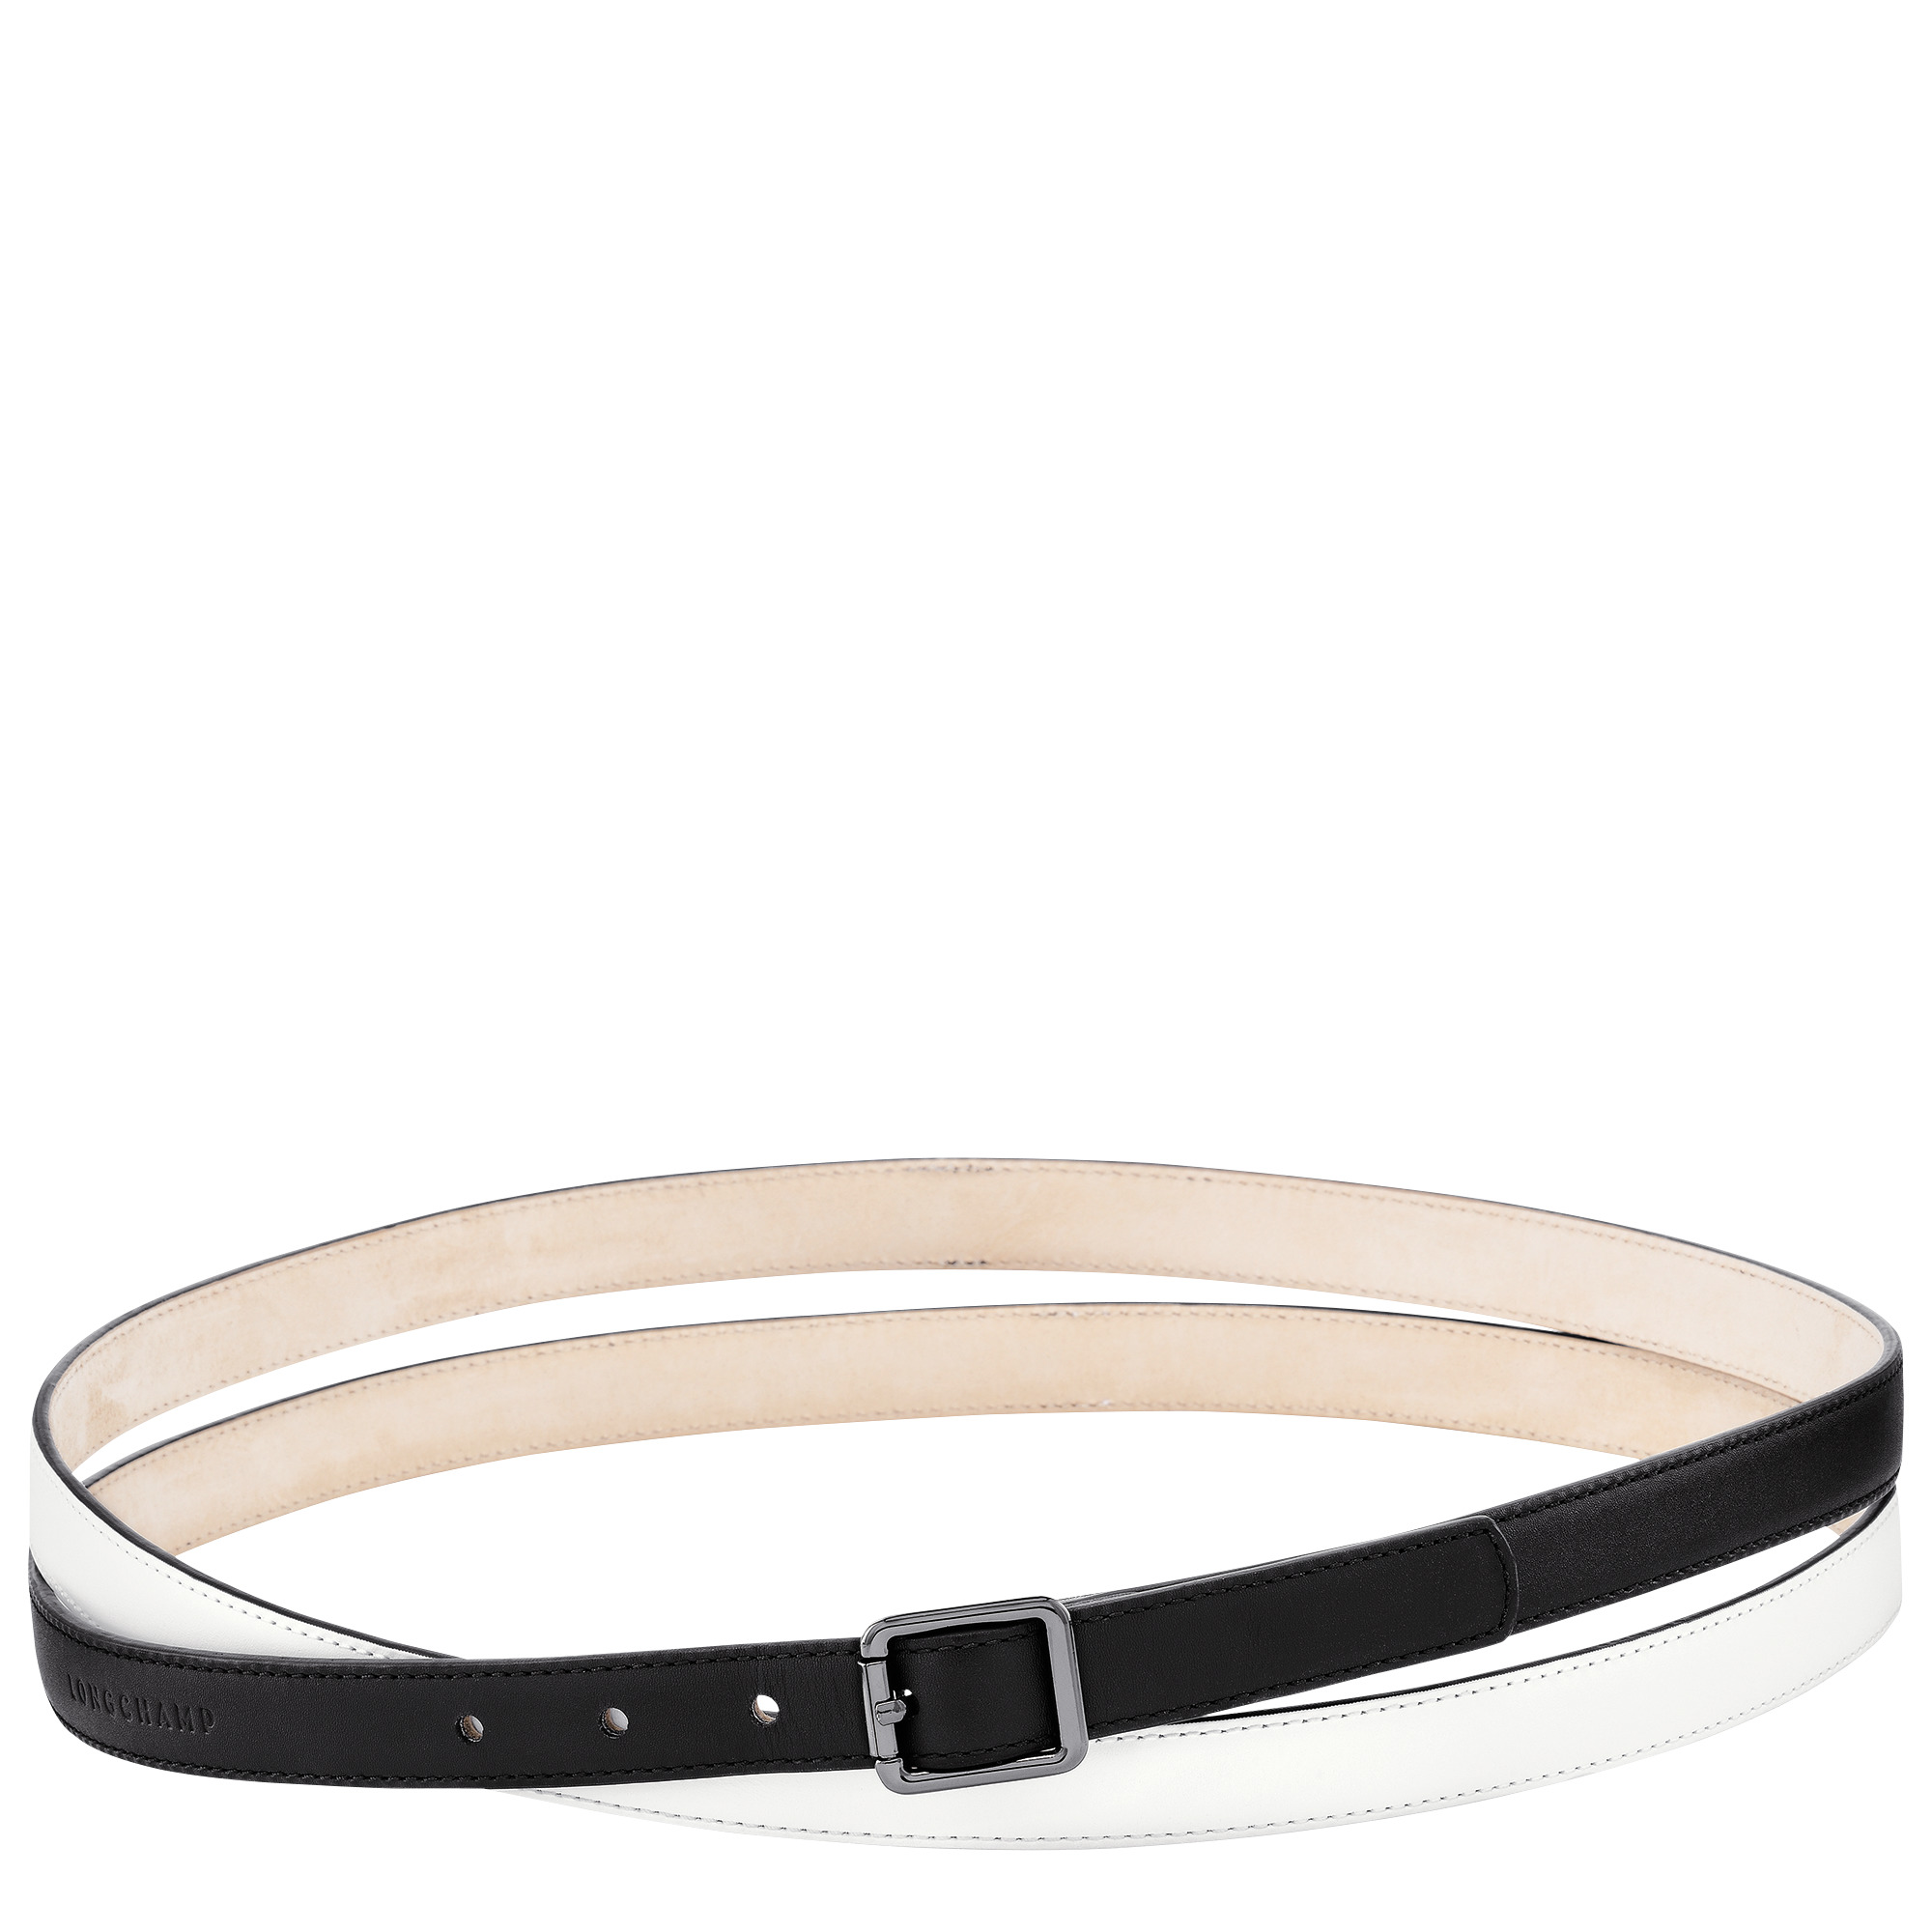 Fall/Winter 2023 Collection Ladies' belt Black/White - Leather - 1